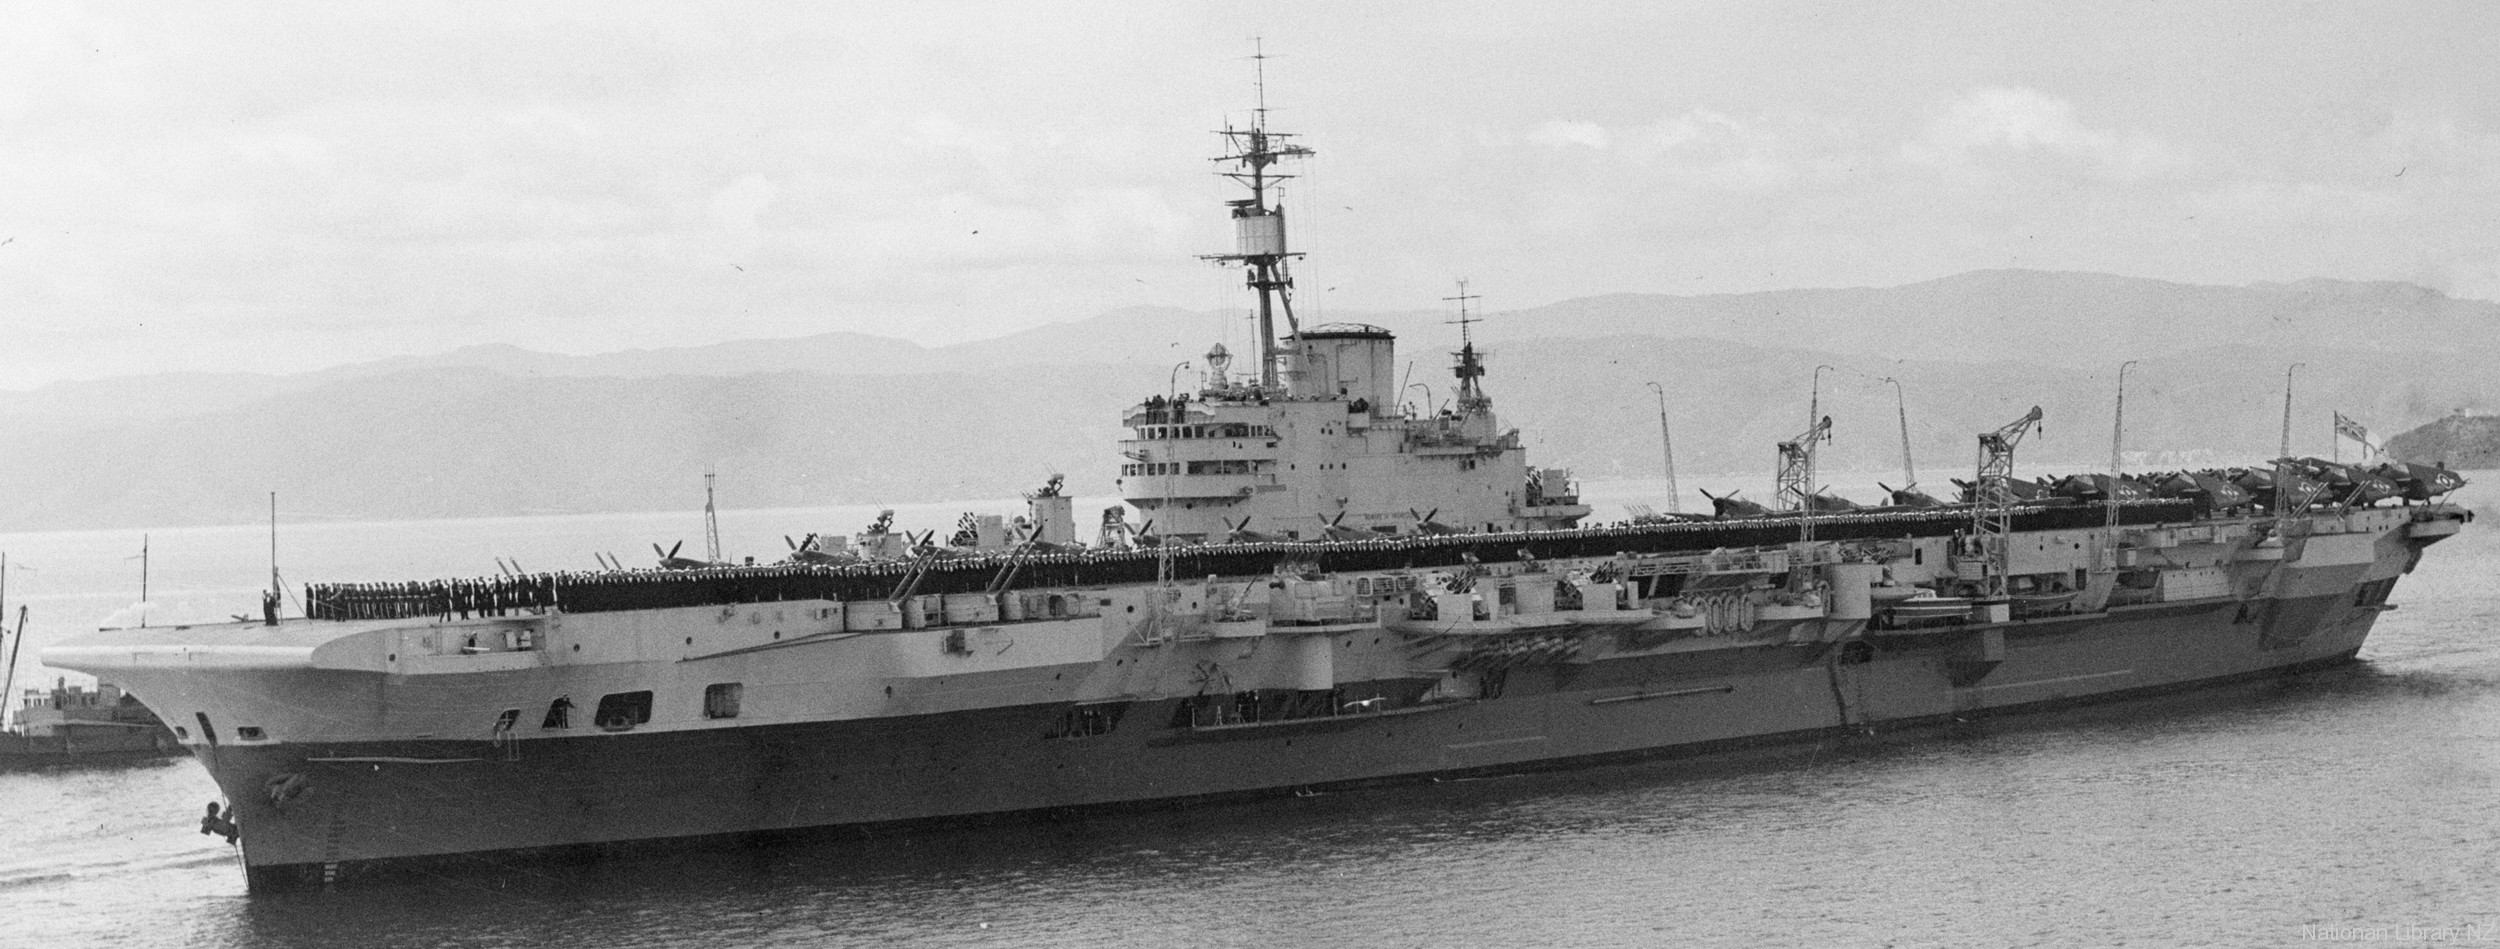 implaceable class aircraft carrier royal navy hms indefatigable